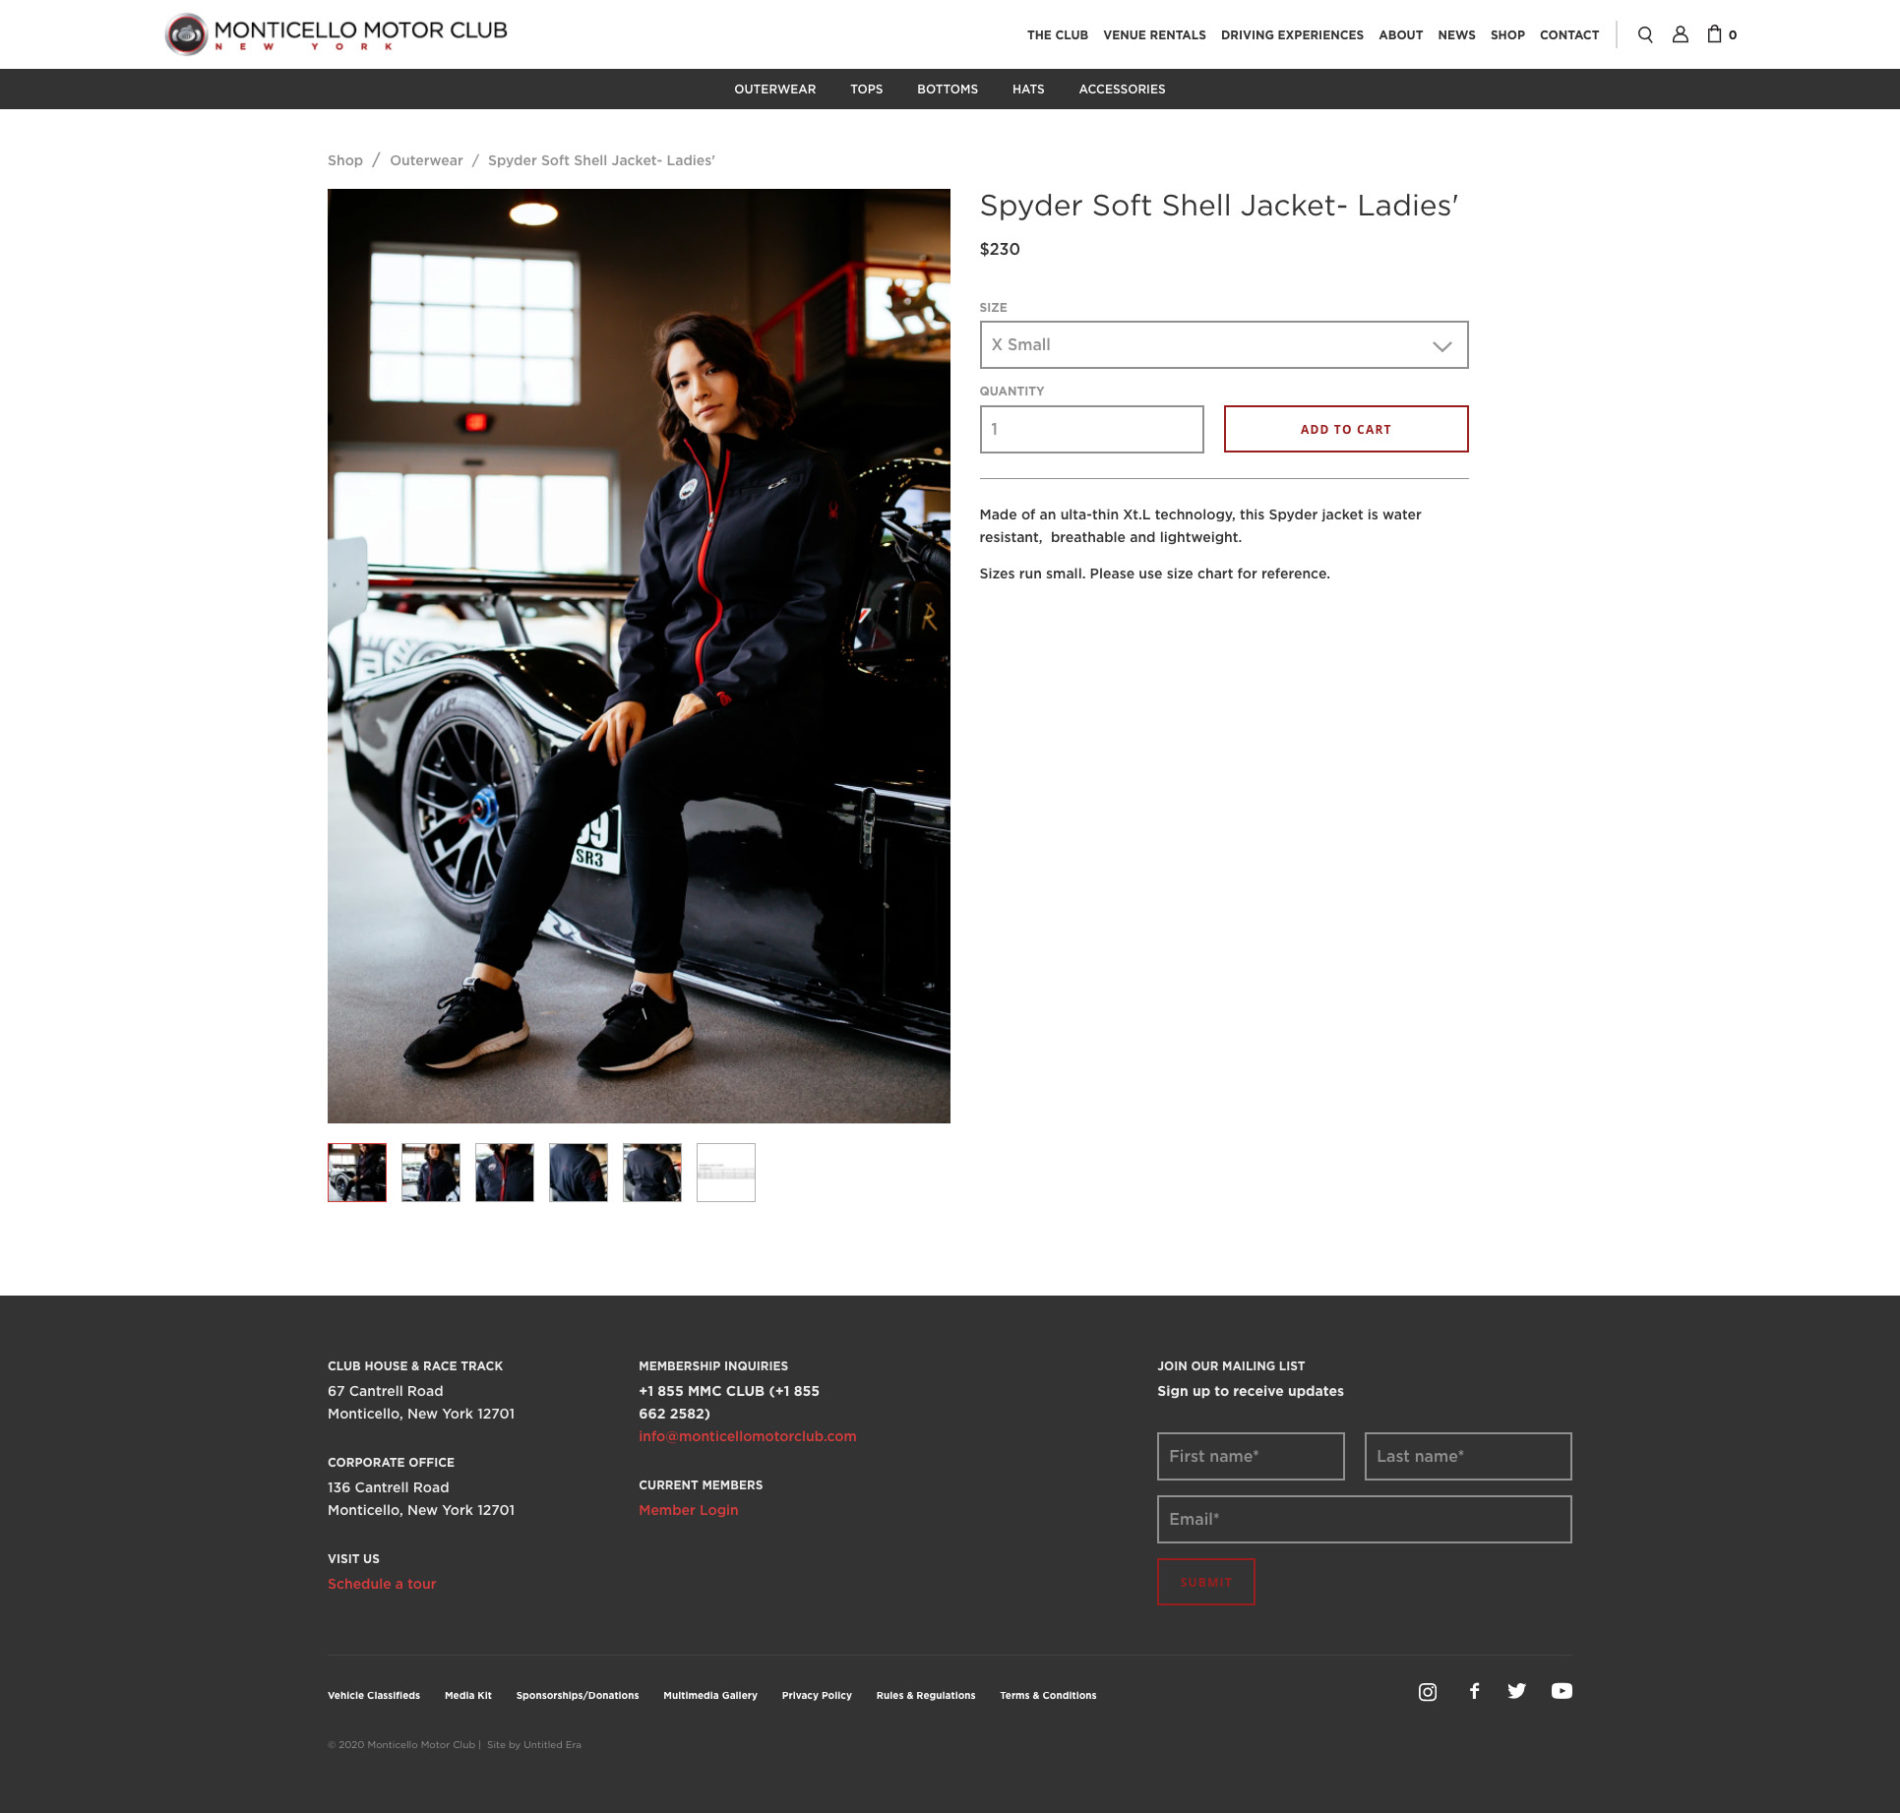 A screenshot of the MMC website Shop product page